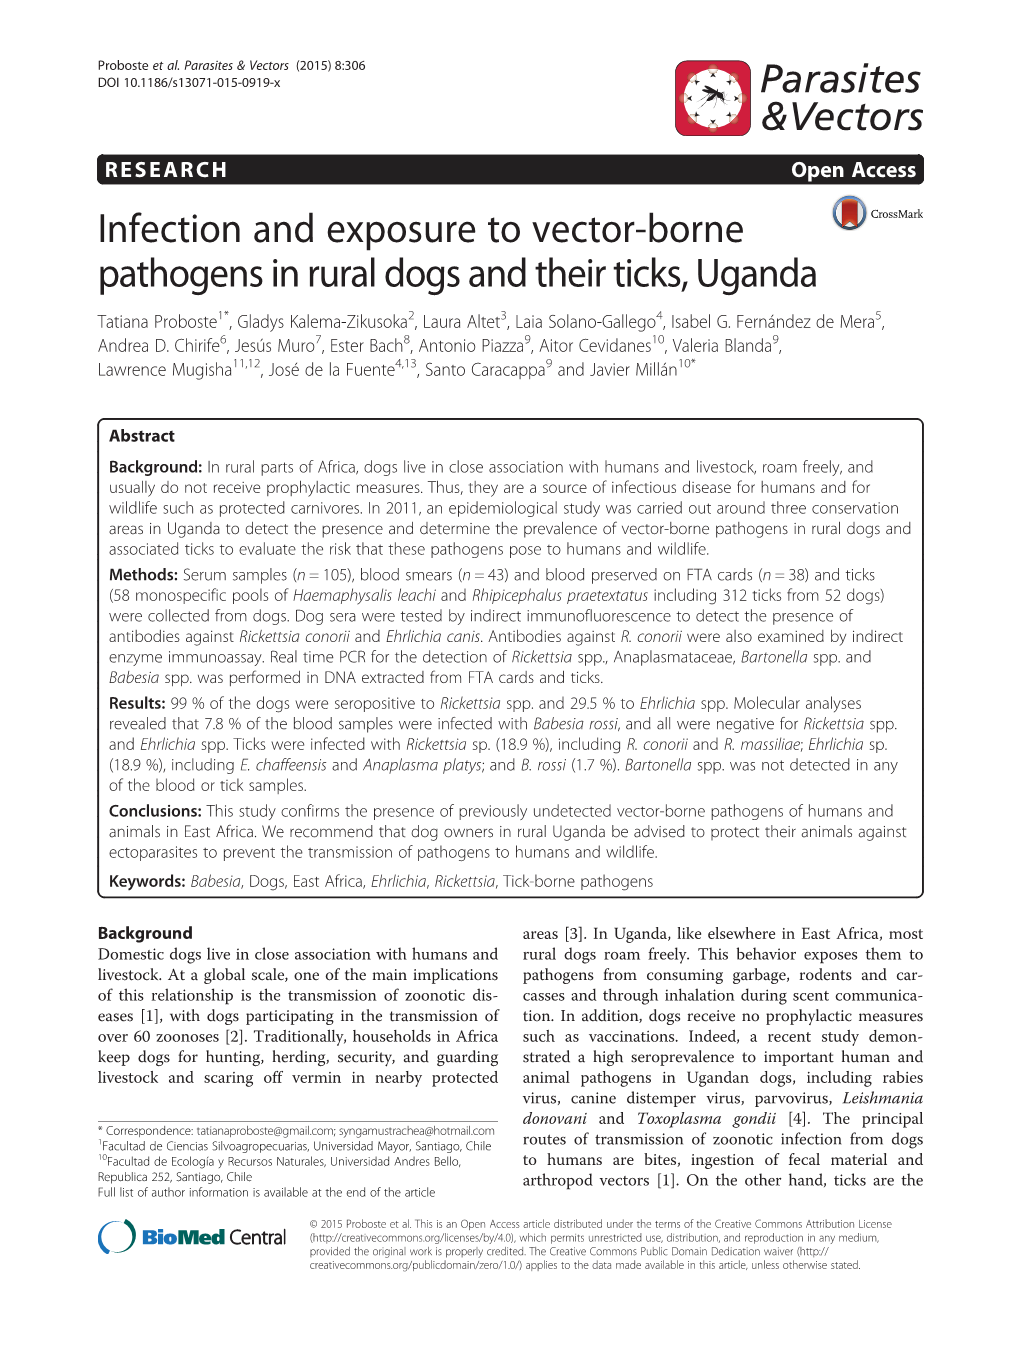 Infection and Exposure to Vector-Borne Pathogens in Rural